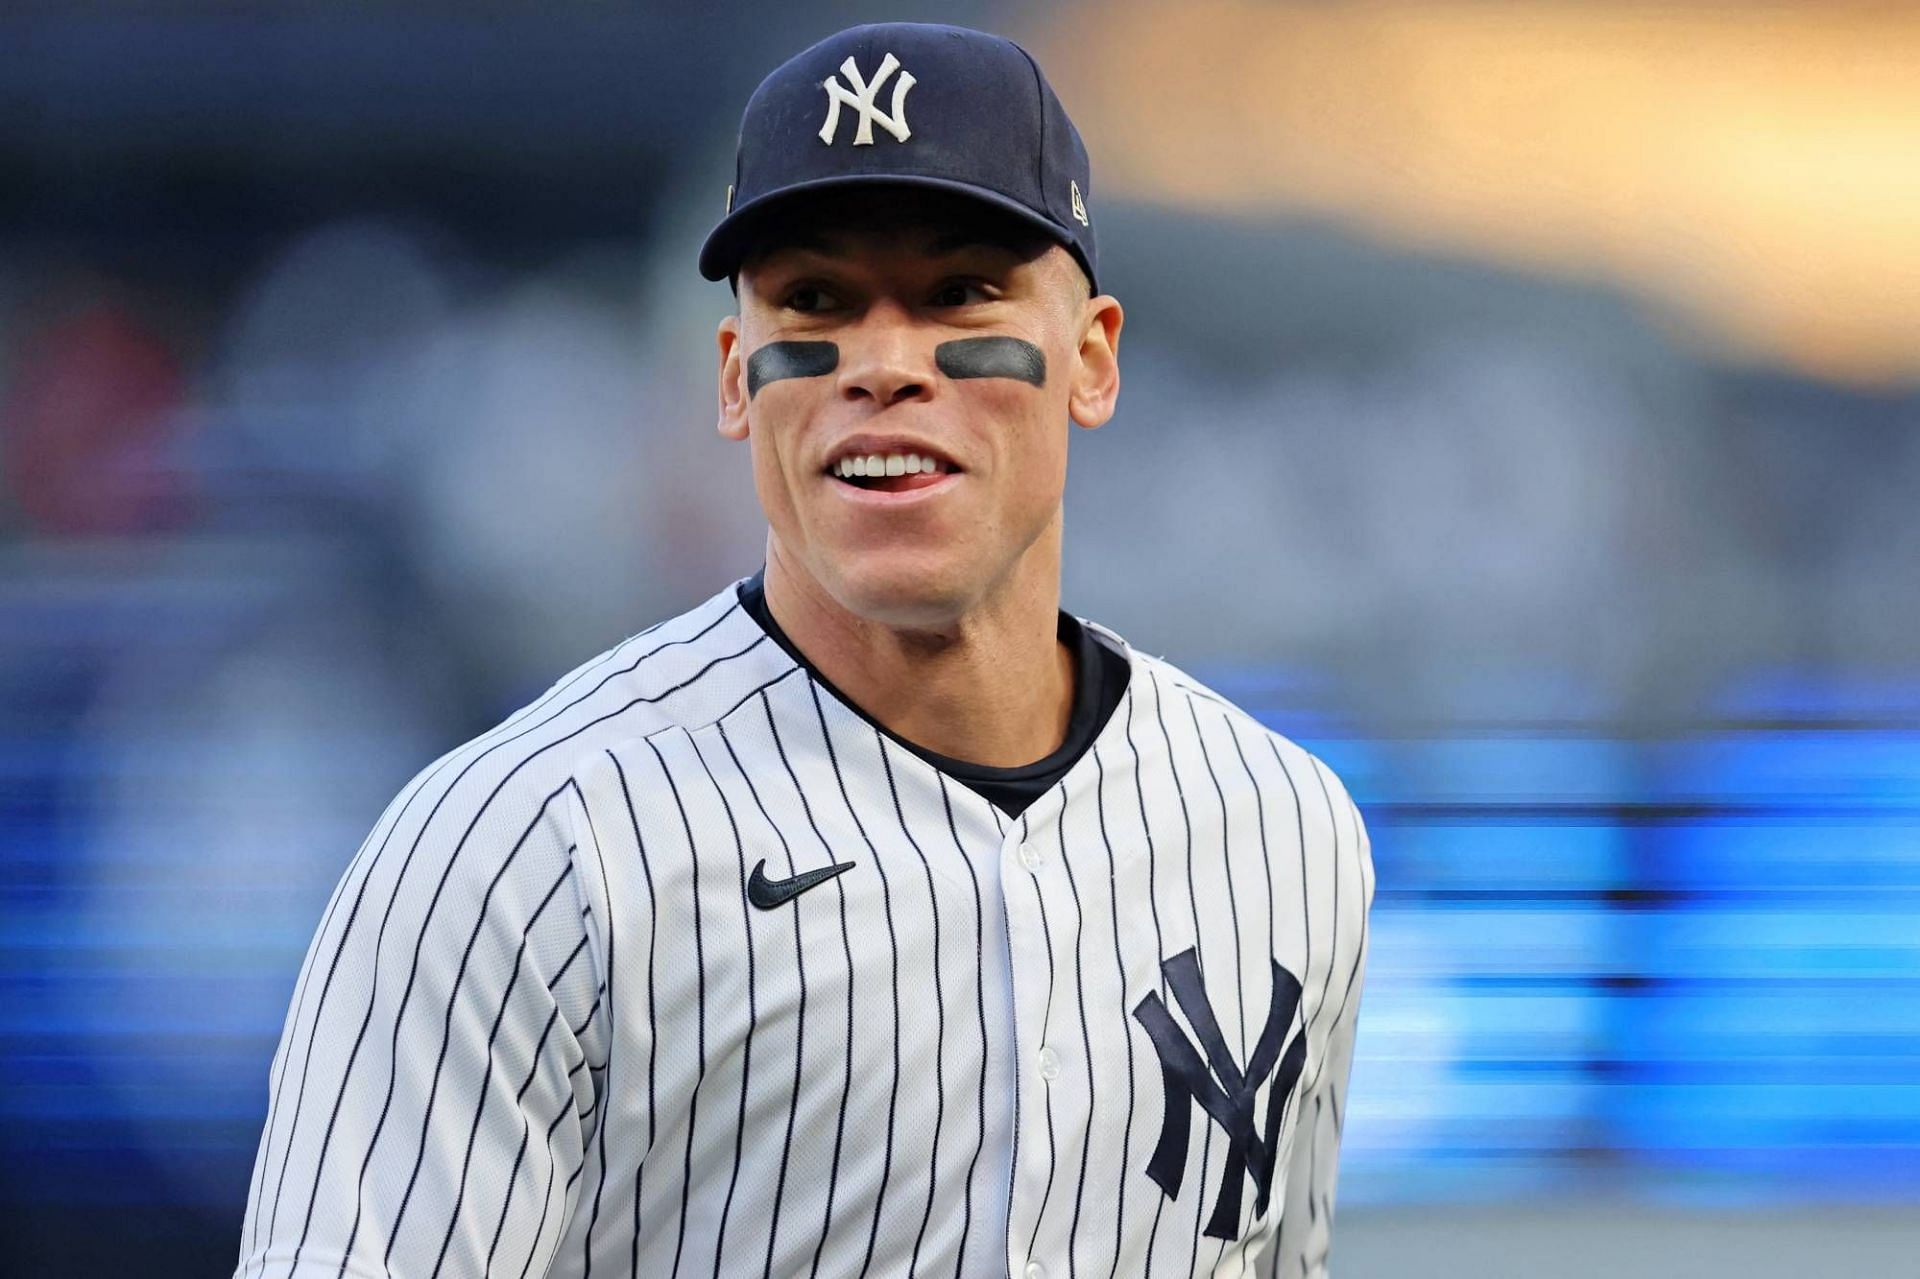 New York Yankees hitter Aaron Judge is expected to play in the 2023 MLB All-Star Game